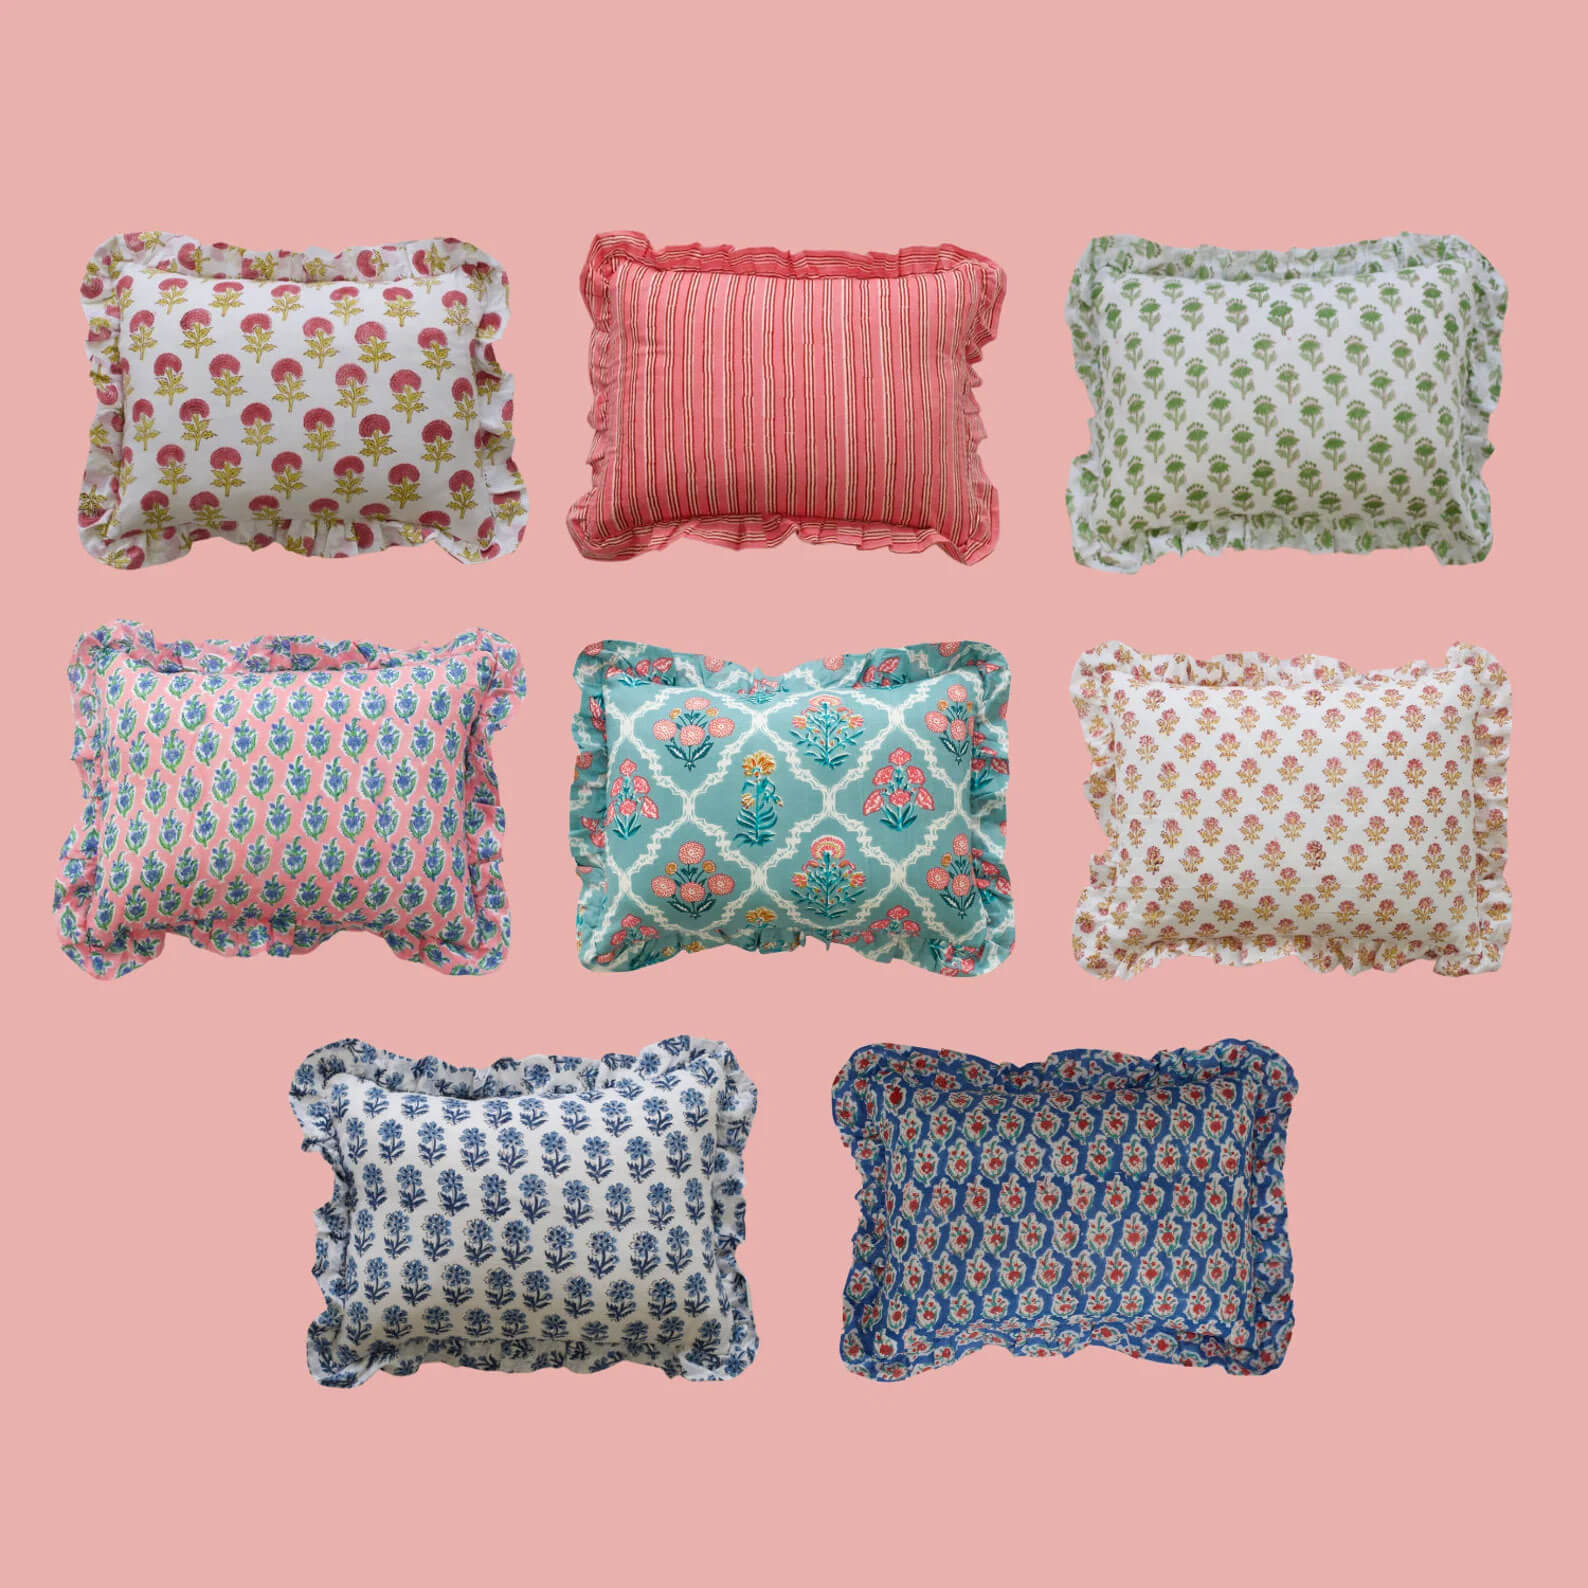 pinkcityhome ruffle cushions with block print patterns - sustainable gifts for christmas